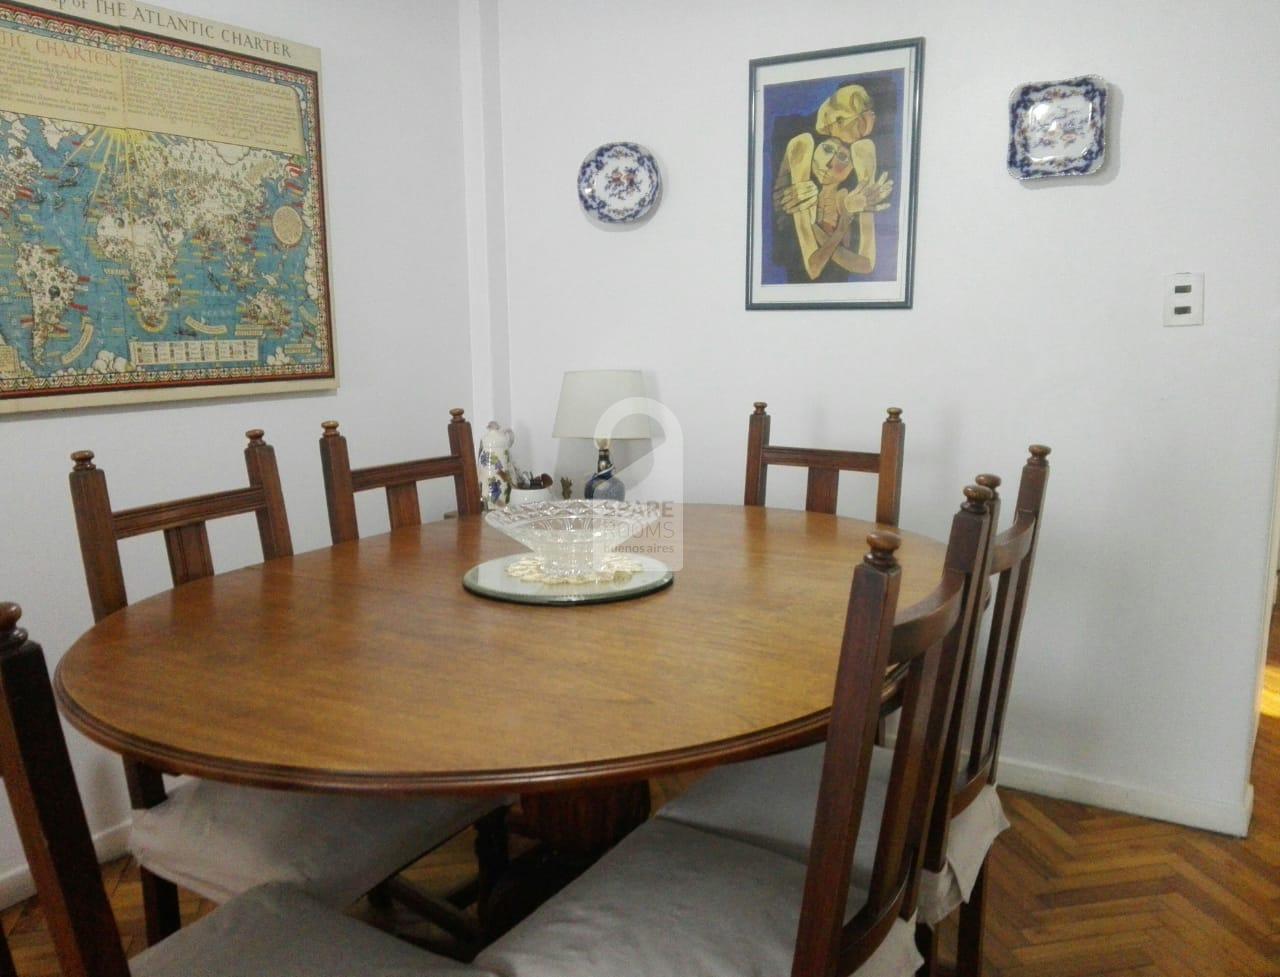 The dining room in the house